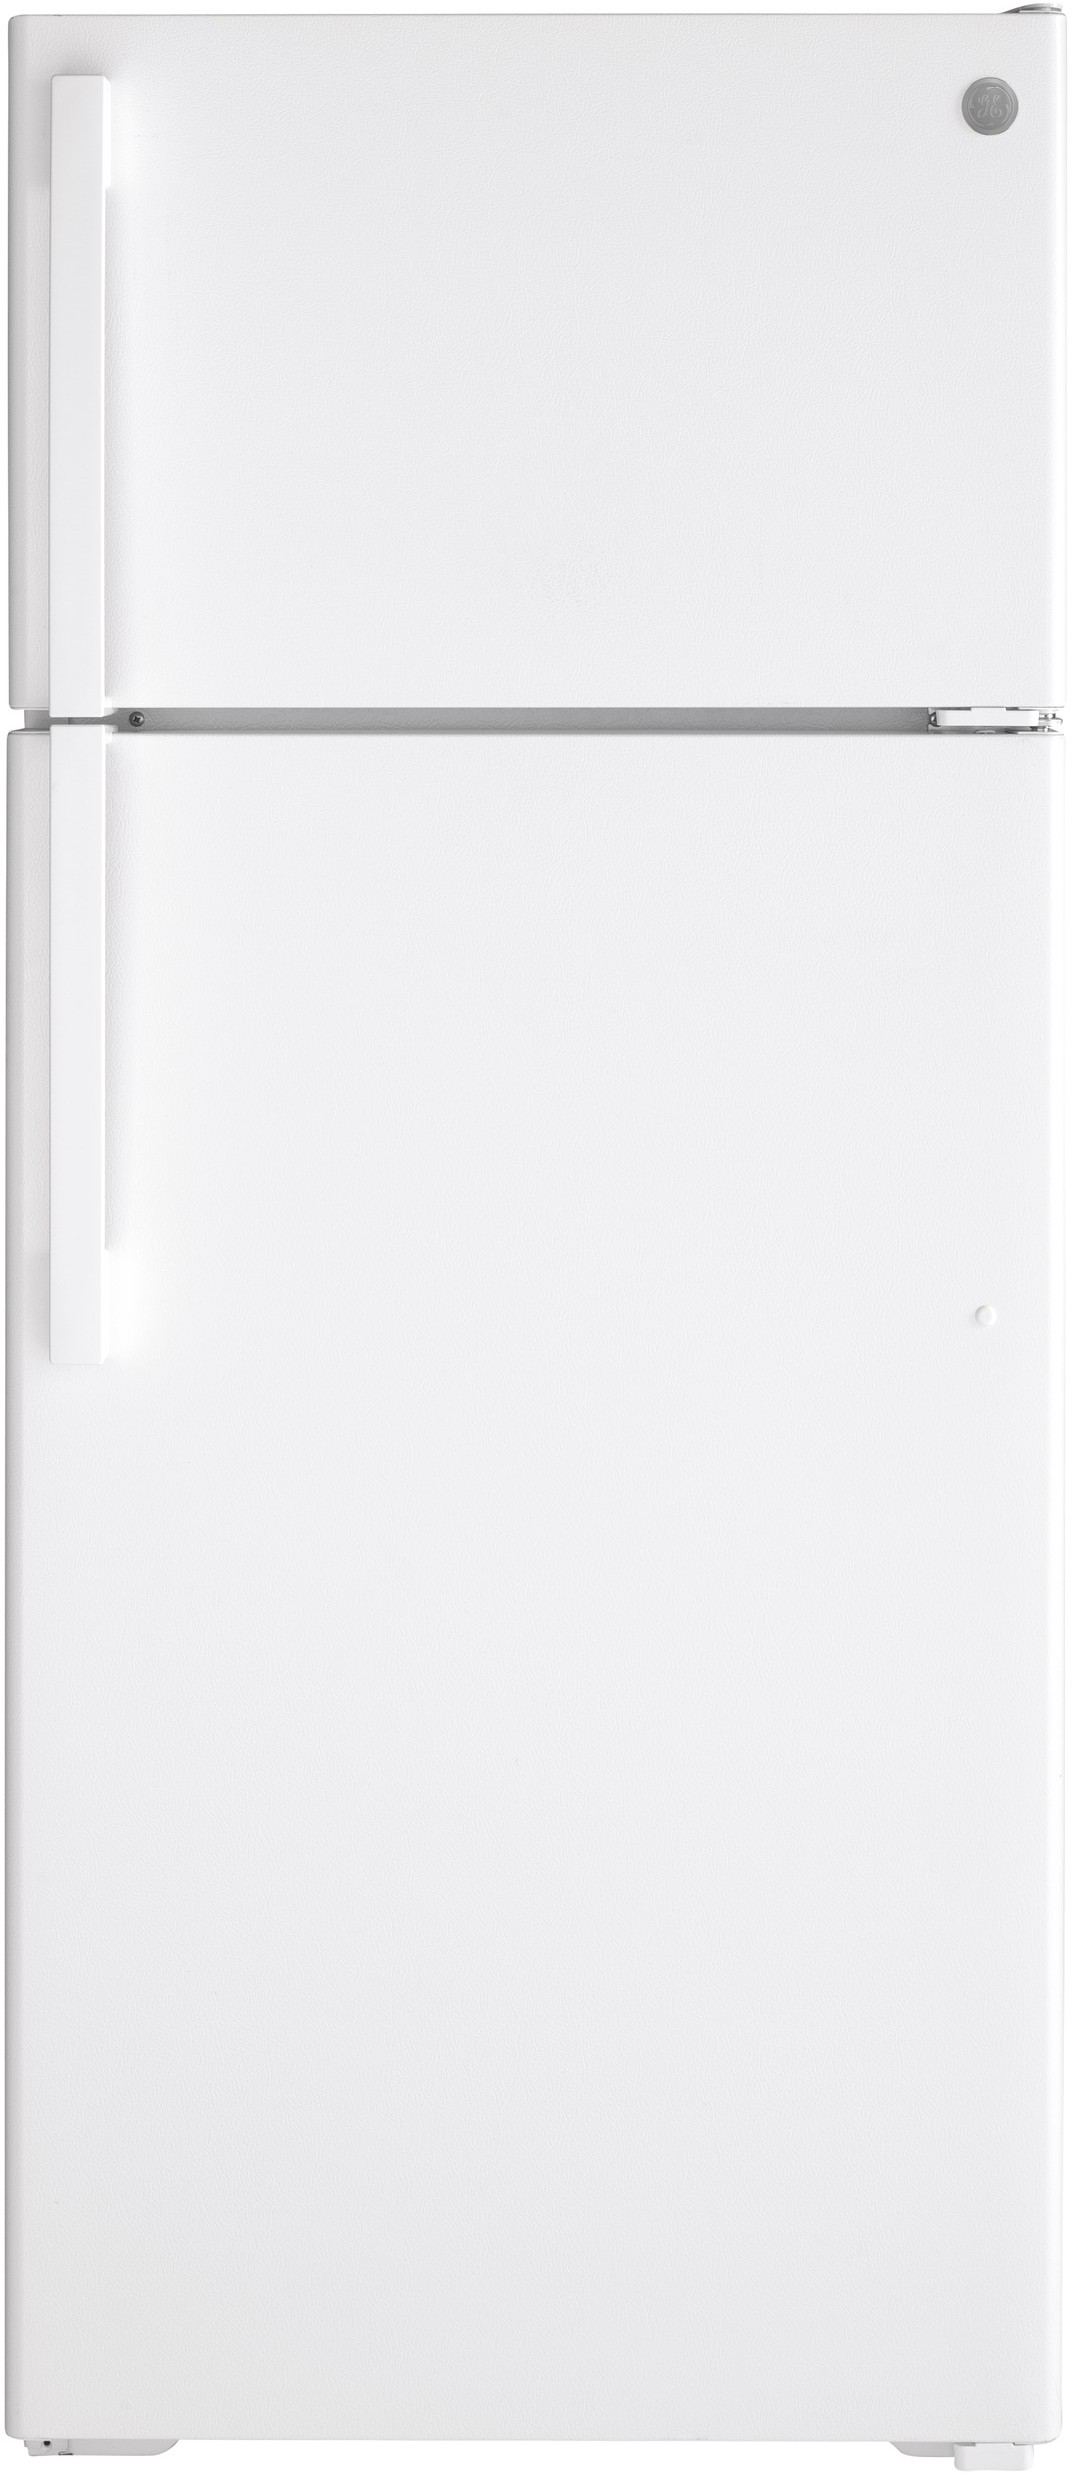 Ge Gte18dtnrww 28 Inch Top Freezer, Replacement Refrigerator Shelves Ge